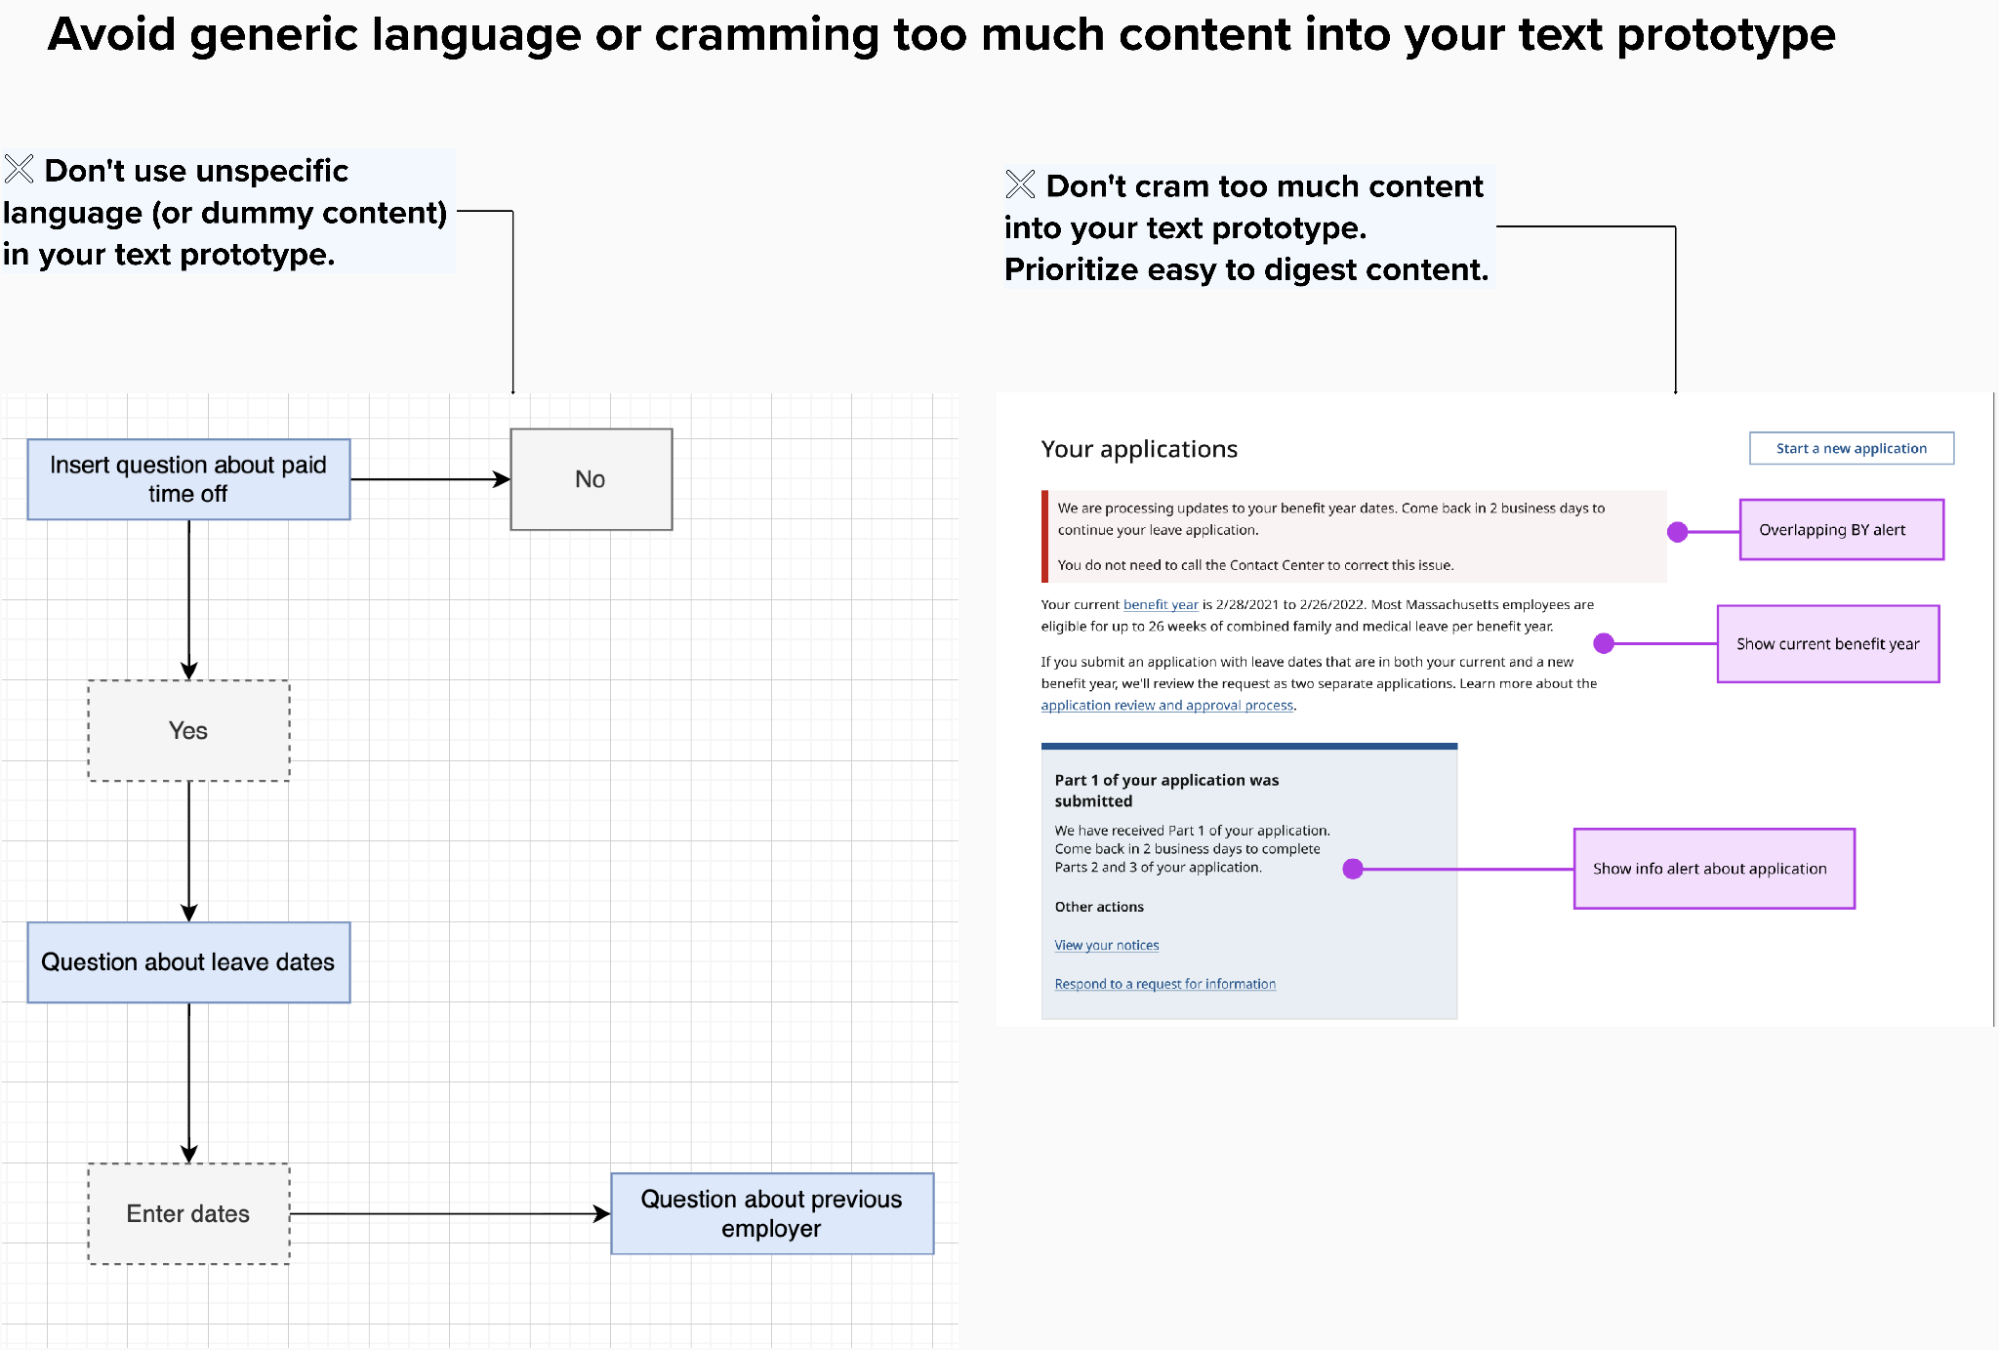 A diagram that demonstrates generic language and cramming content. 